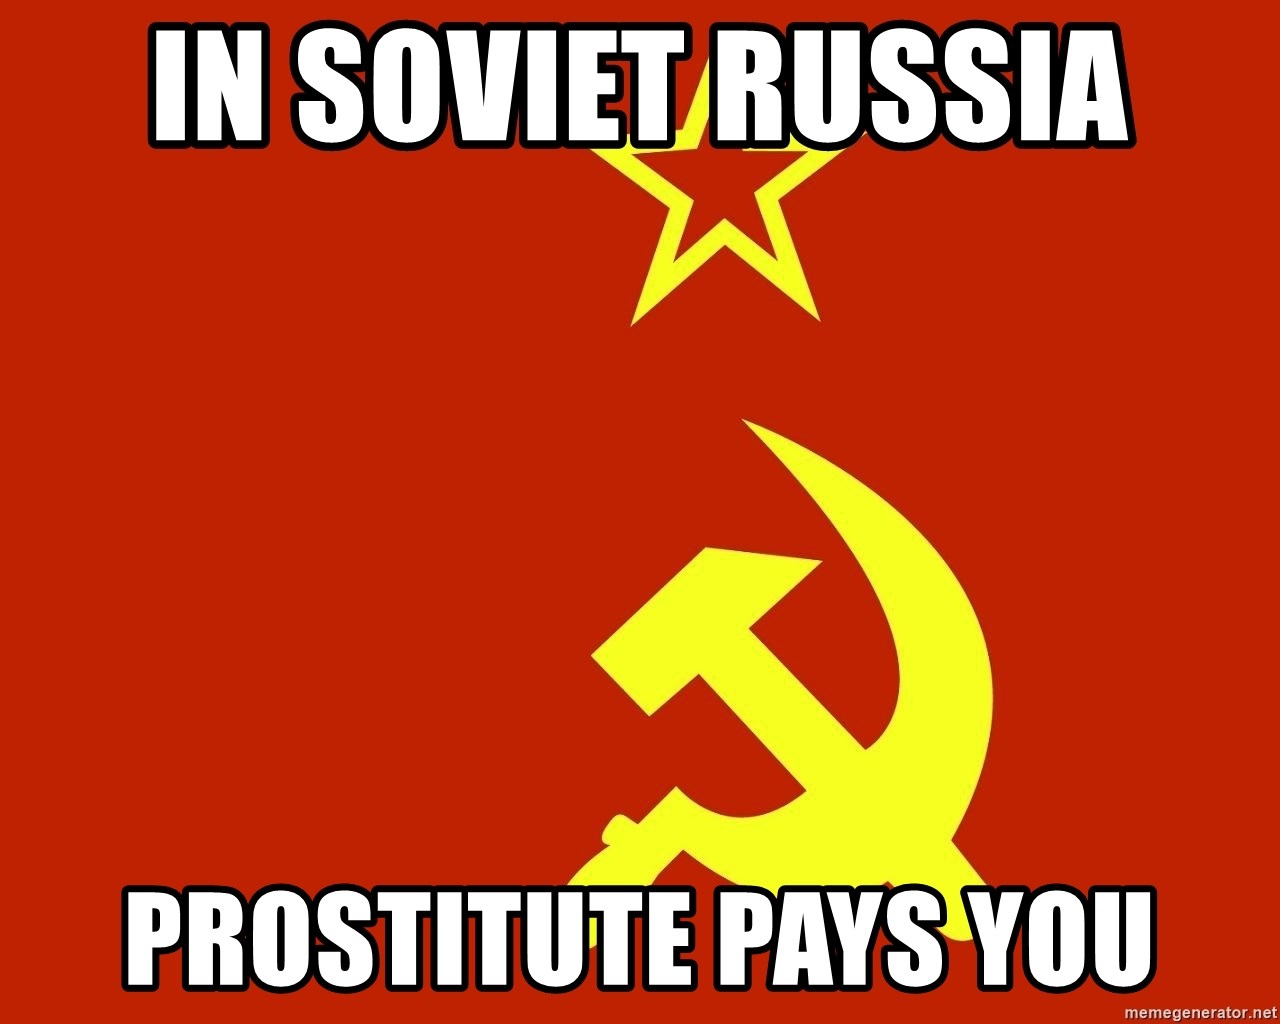 In Soviet Russia - in soviet russia  prostitute pays you